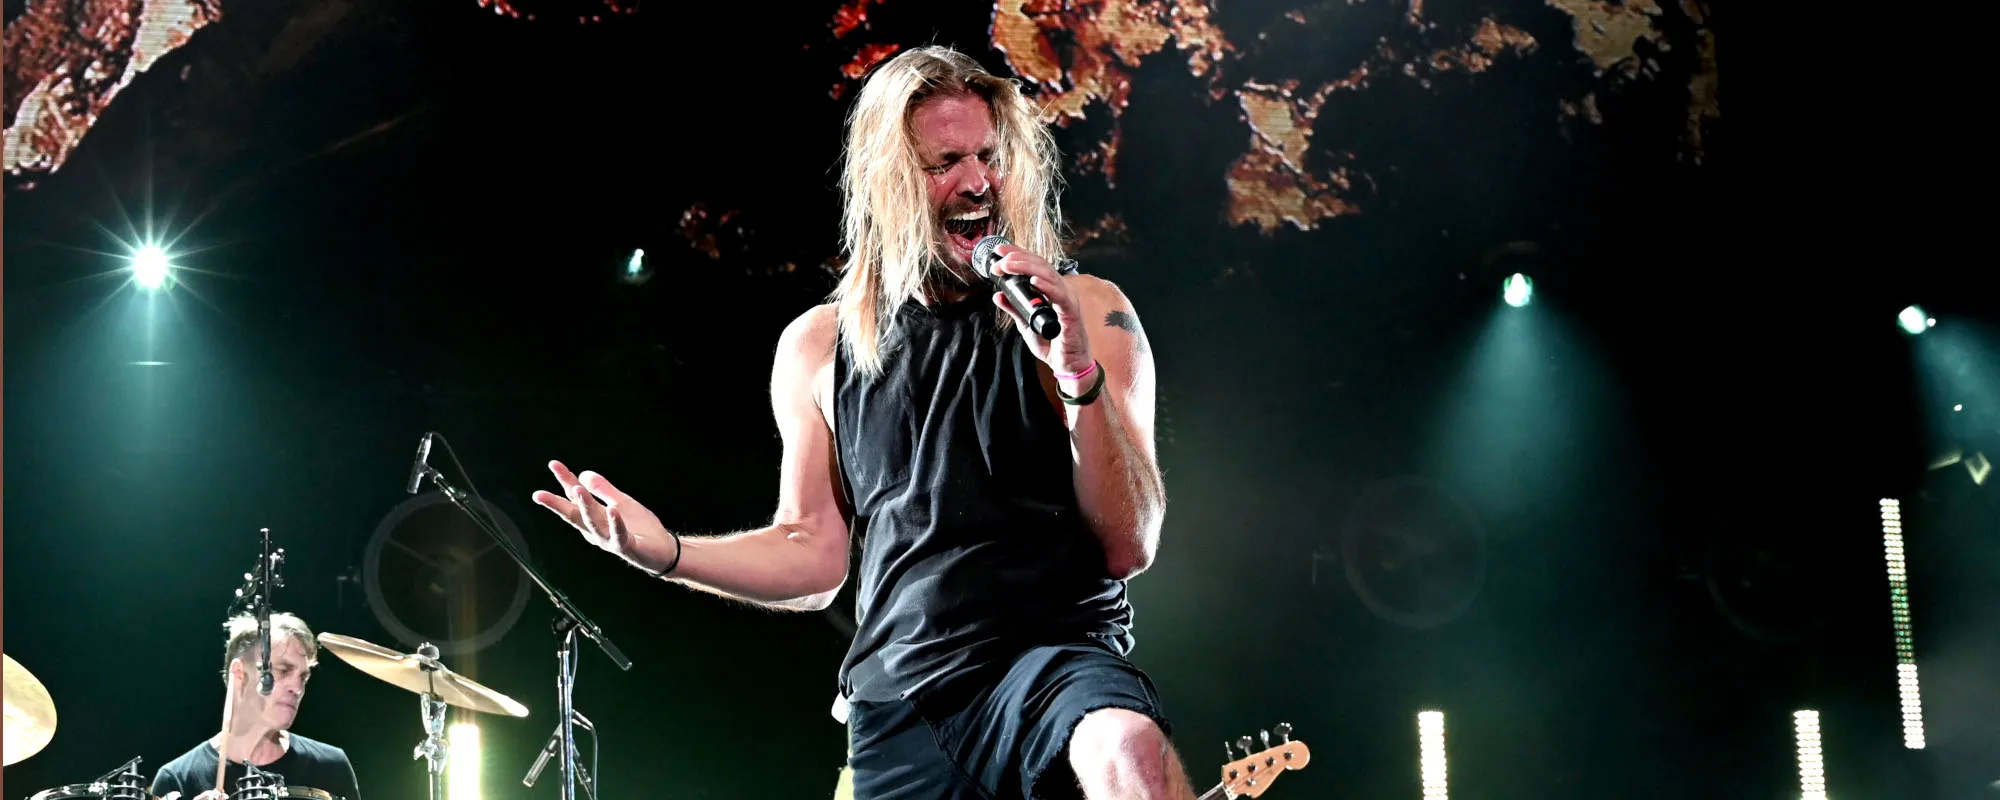 Collection of Stars Pay Tribute to Taylor Hawkins at L.A. Show—Nancy Wilson, Dave Chappelle, Wolfgang Van Halen, Alanis Morissette and More